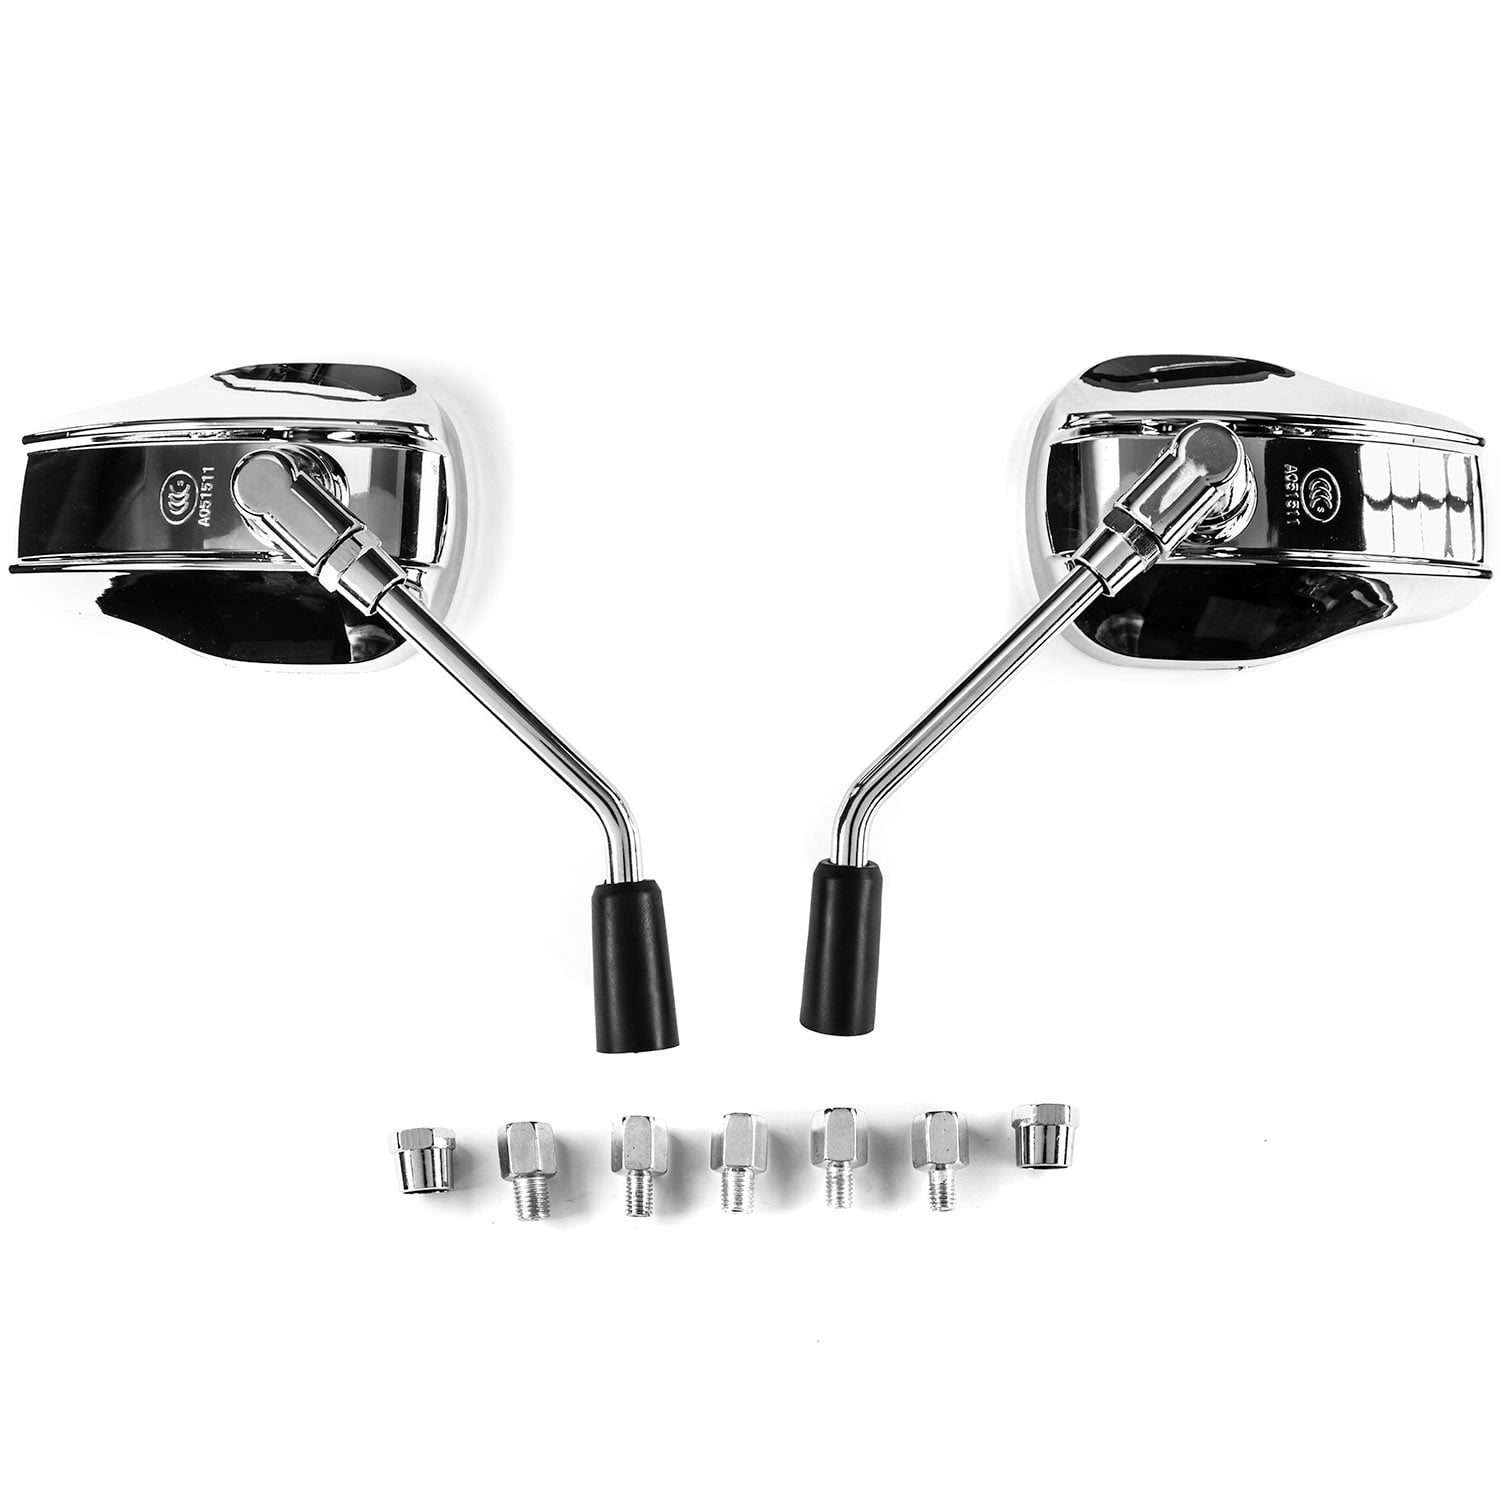 Chrome Motorcycle Mirrors For Yamaha Royal Star Venture Classic Royale Deluxe